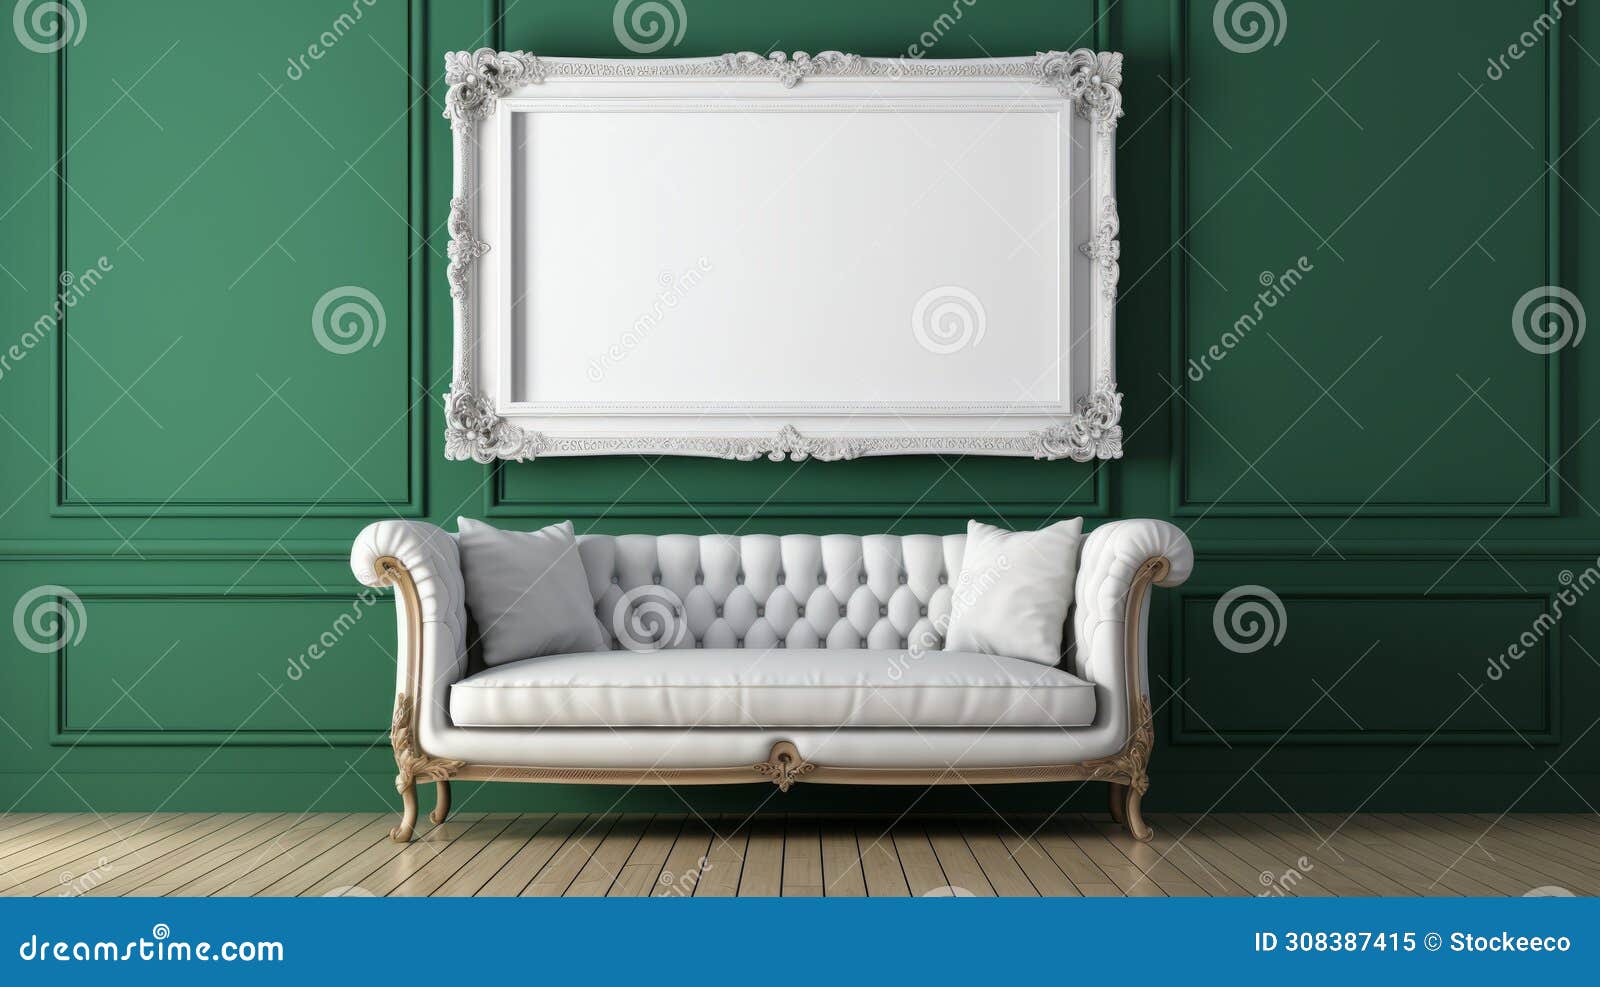 baroque grandiosity: white couch with frame against green wall